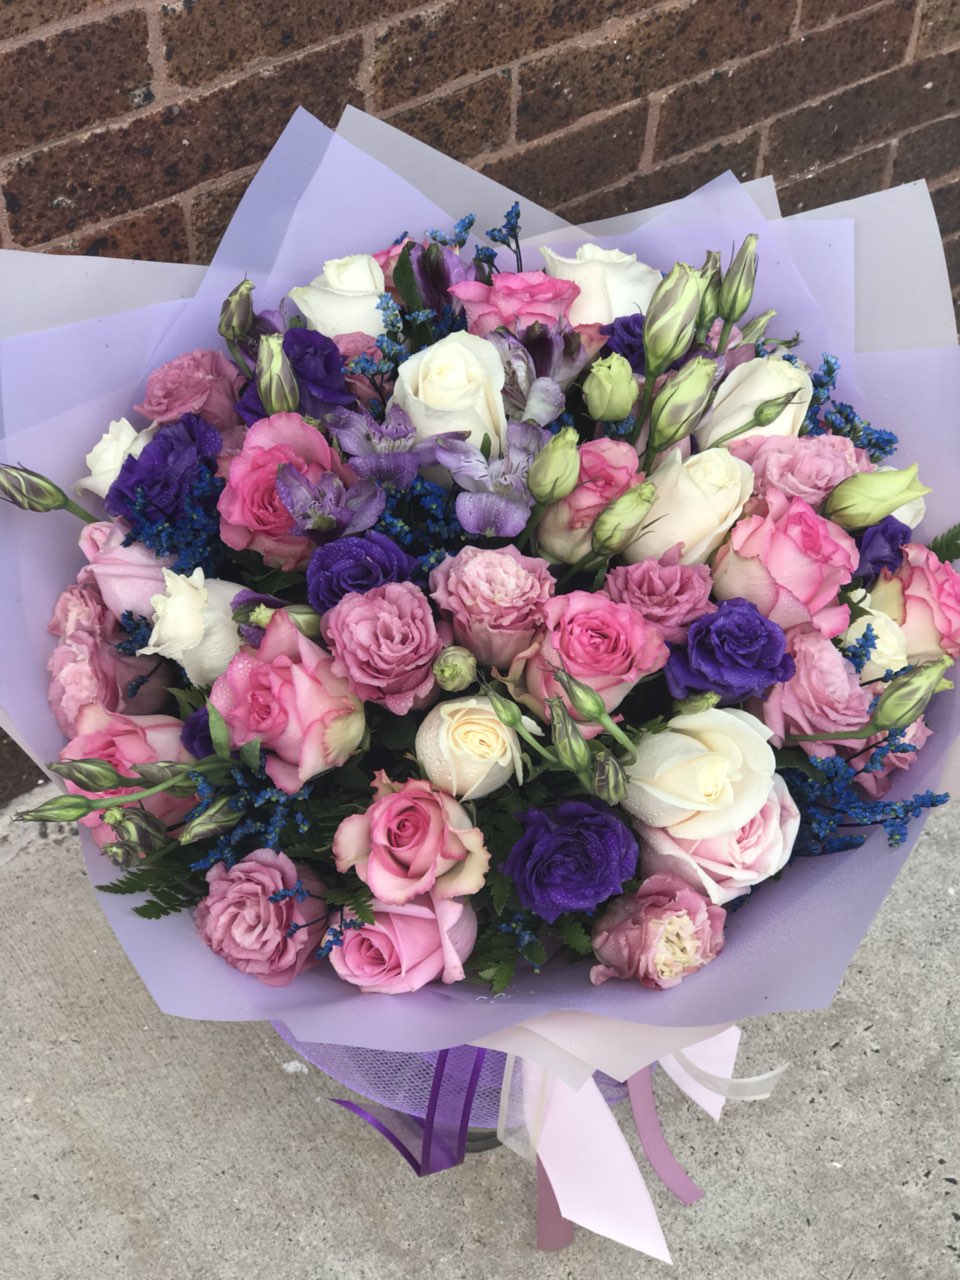 Whatever the occasion - when you truly want to spoil her, send this luxurious lavender arrangement! Deluxe and dramatic, this mix of flowers is a gift she won't soon forget.  Includes:  Pink roses, purple and pink lisianthus, white roses, blue limonium, fern. Wrapped in a craft paper Free message card